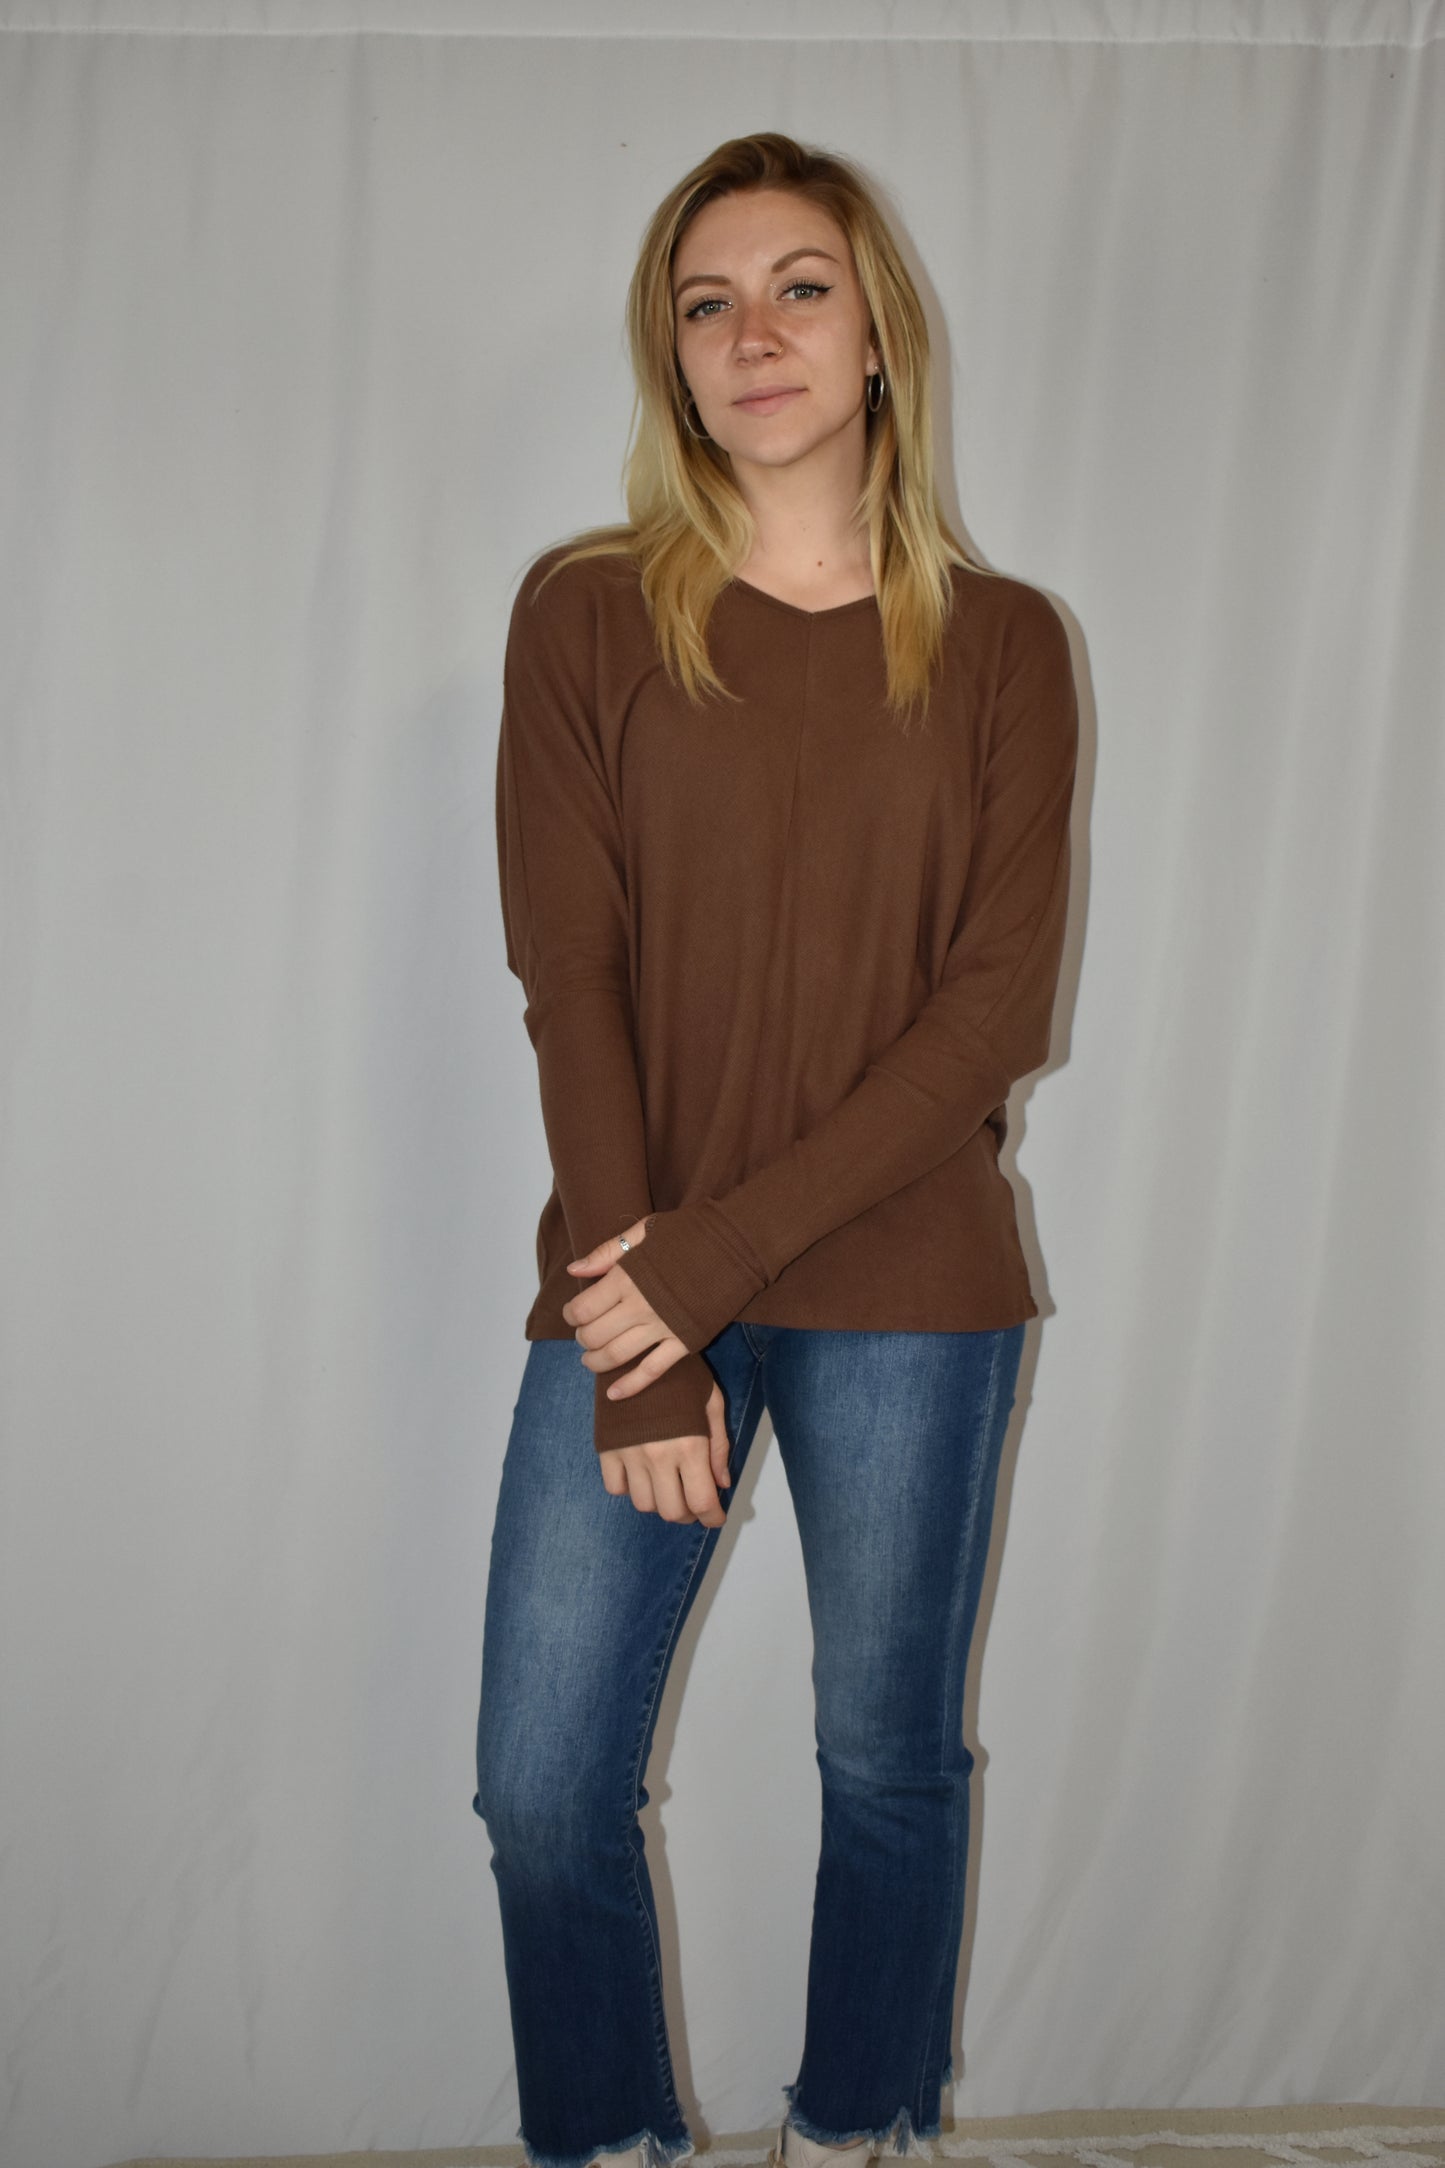 Brown ribbed long sleeve full length stretchy knit top with super soft fabric, dolman sleeves, thumb holes, and a v neck.